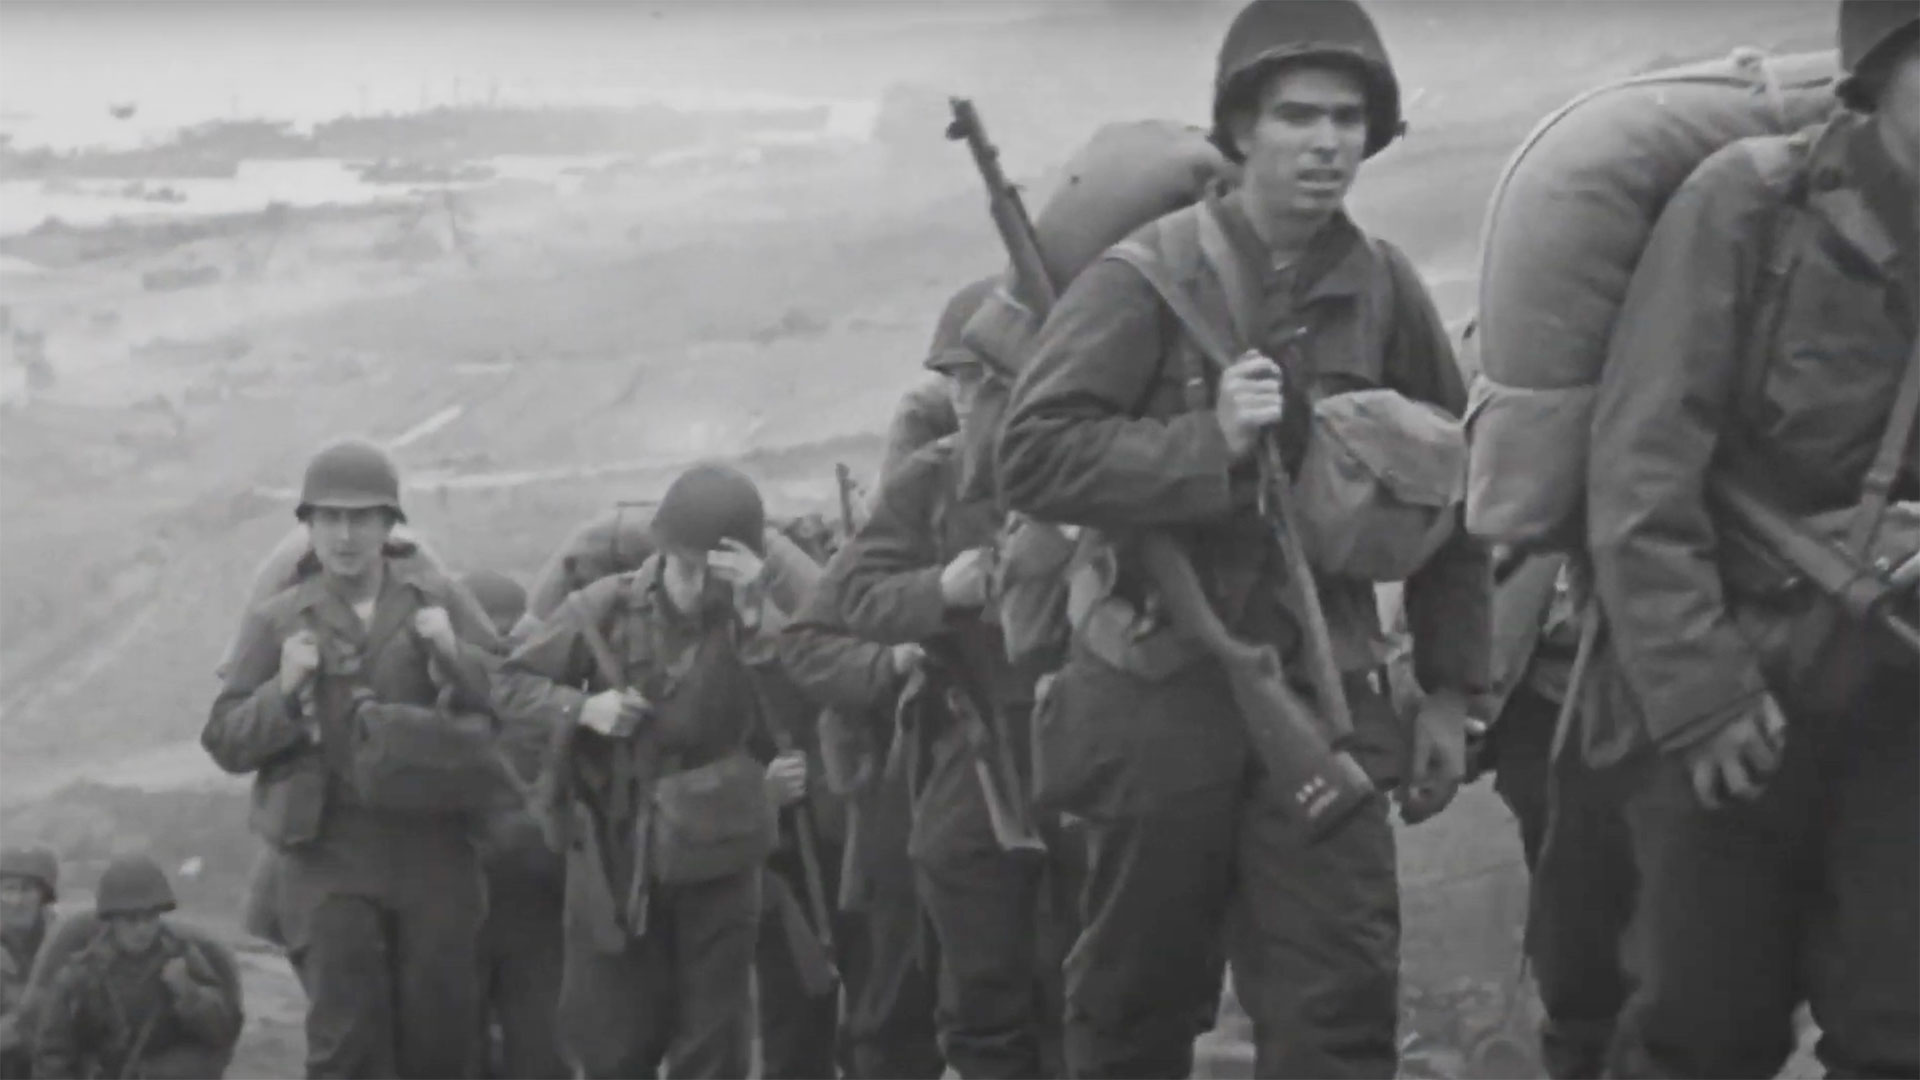 U.S. infantrymen making their way up one of the draws of "Omaha" beach to the interior of Normandy after the landings.